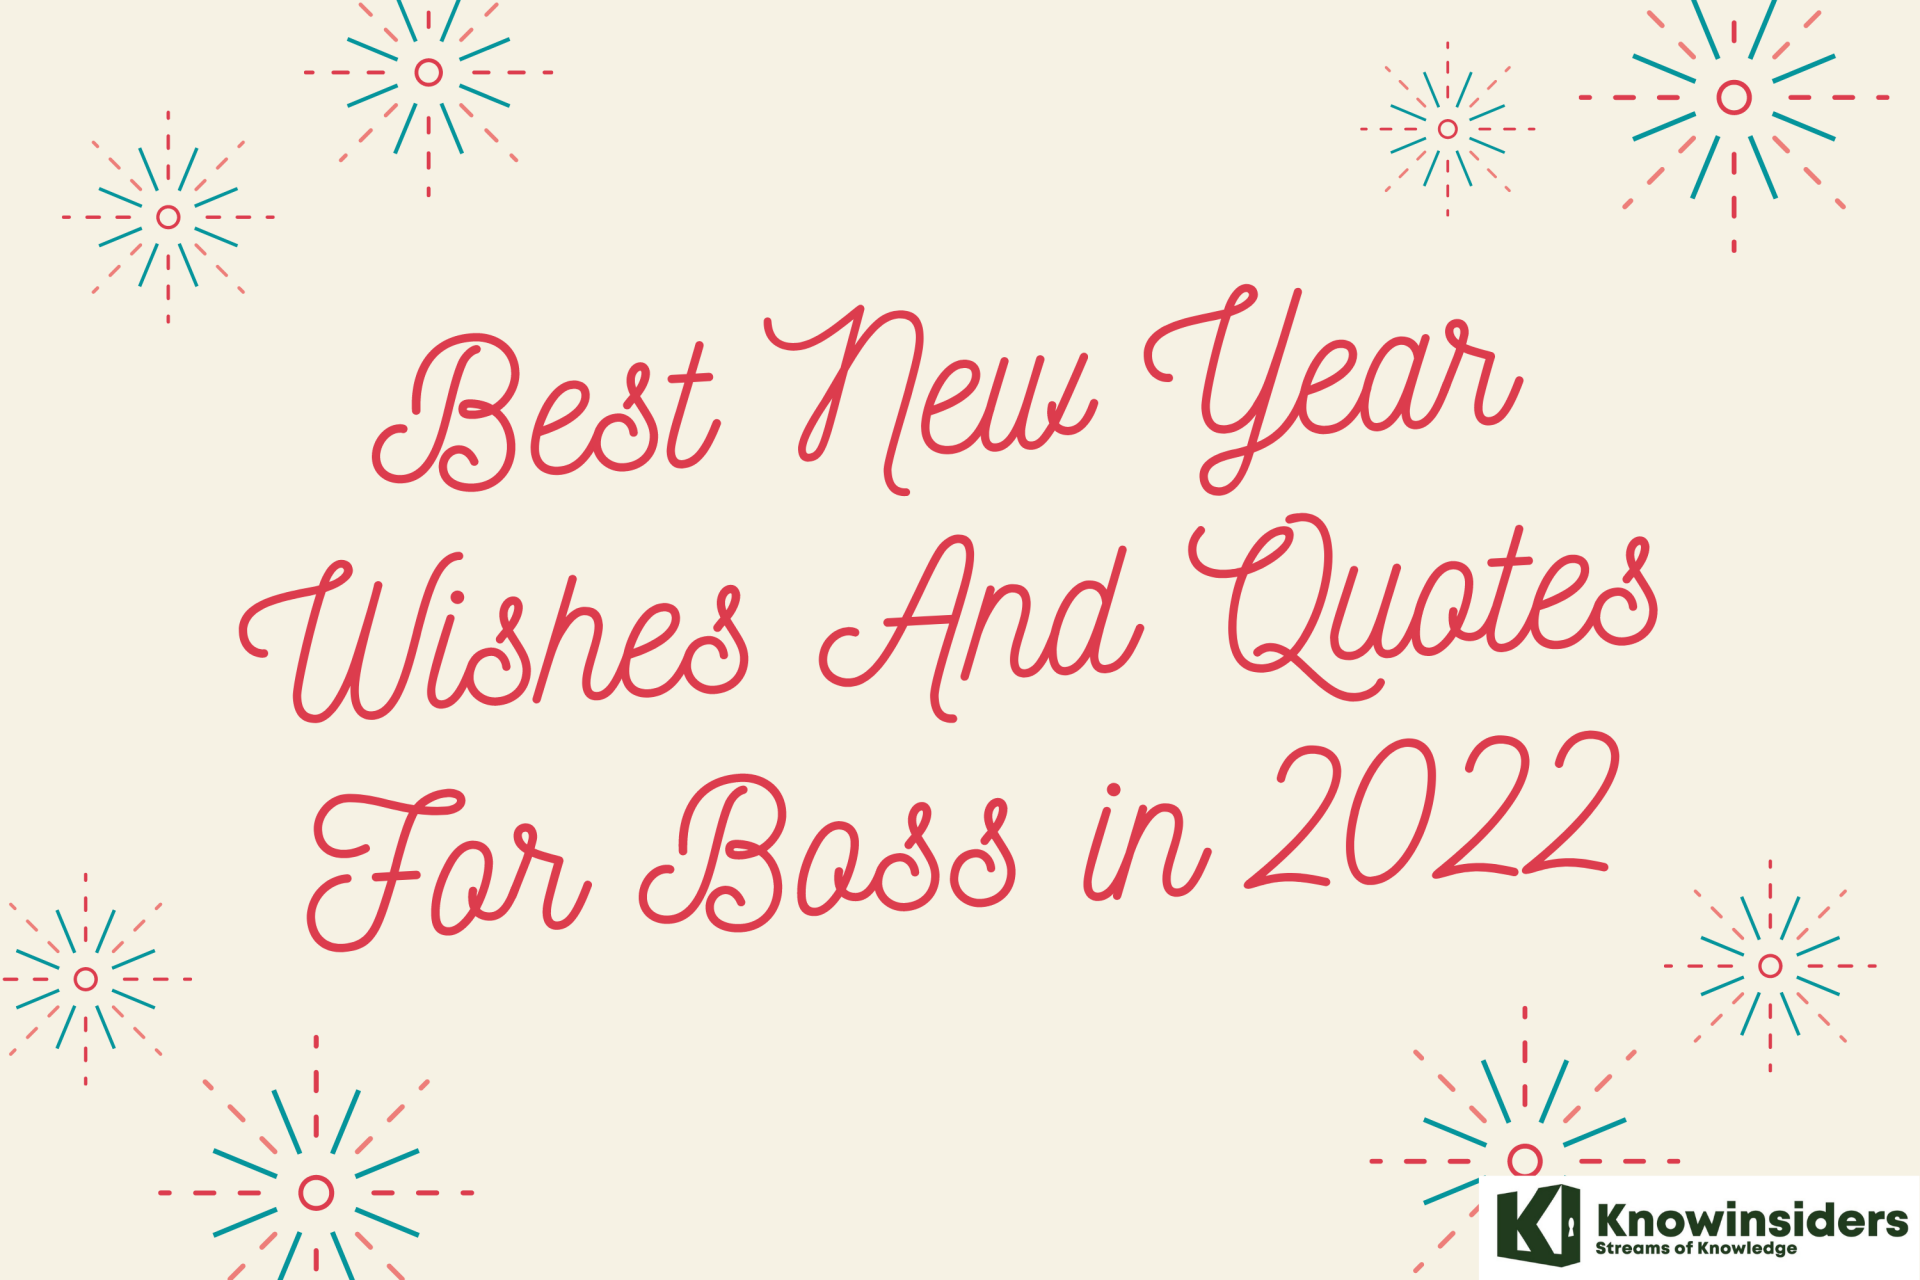 50+ Best New Year Wishes And Quotes For Boss